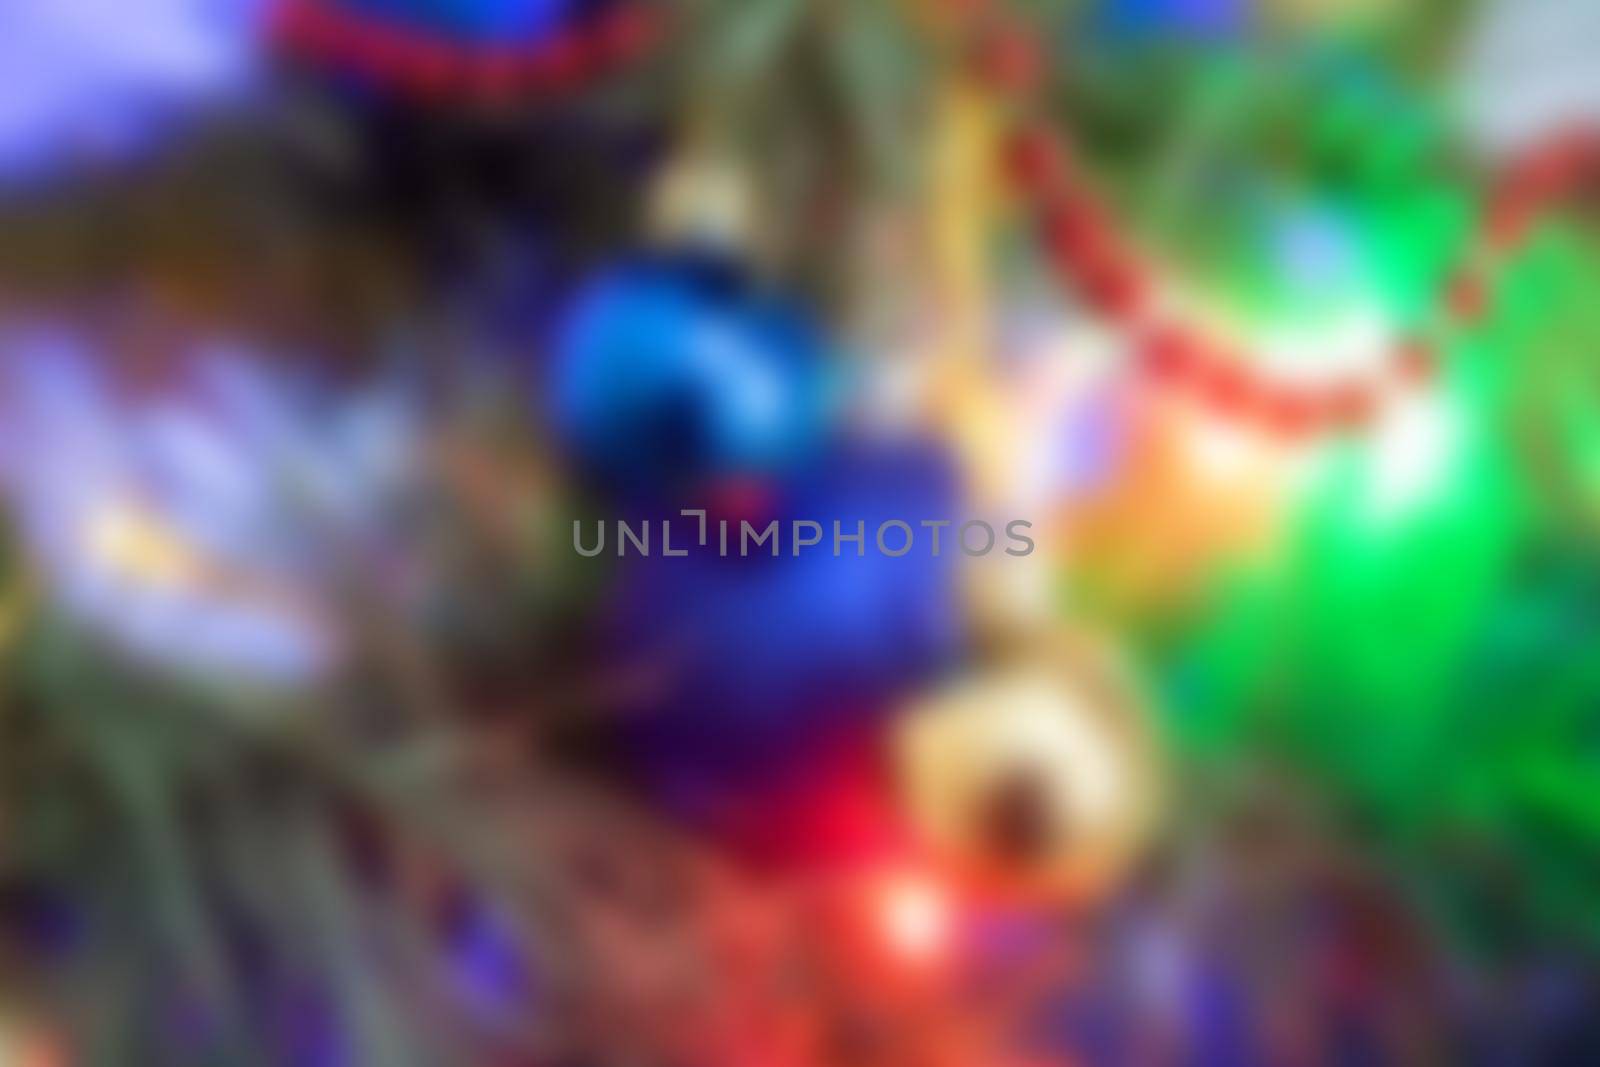 Blurred christmas tree. Decorated with colorful christmas balls. Blurred background with an empty space for text.